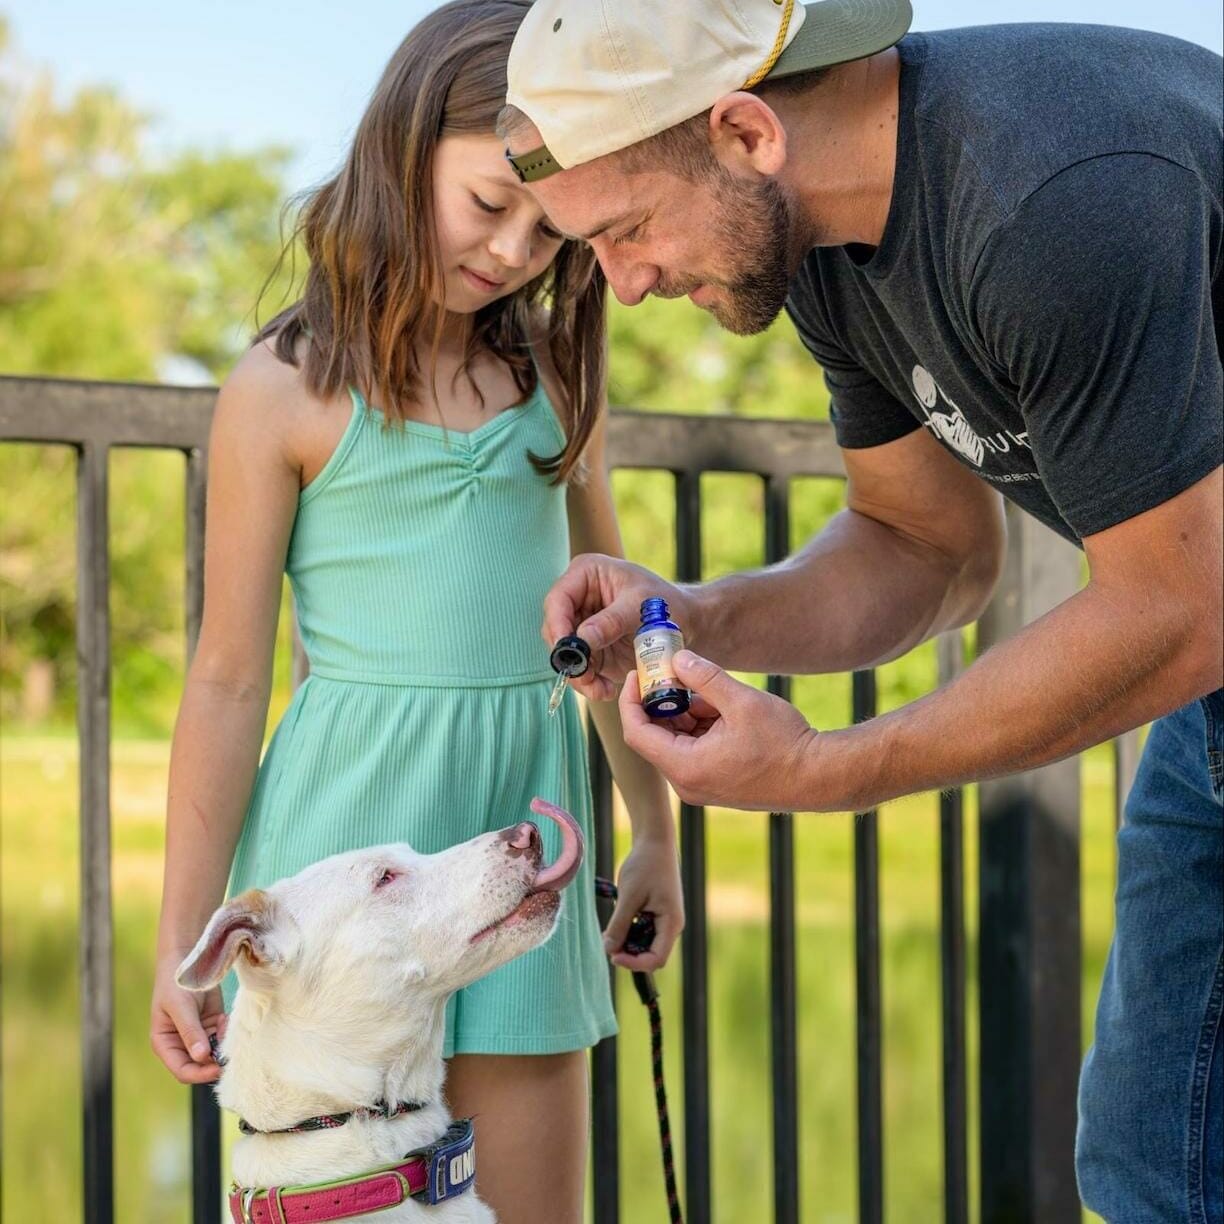 Earth Buddy founder, Sean Zyer and his daughter giving Cellular Support 500mg CBG Extract to white dog with brown spots. CBG for dogs helps with IBS and seizures.